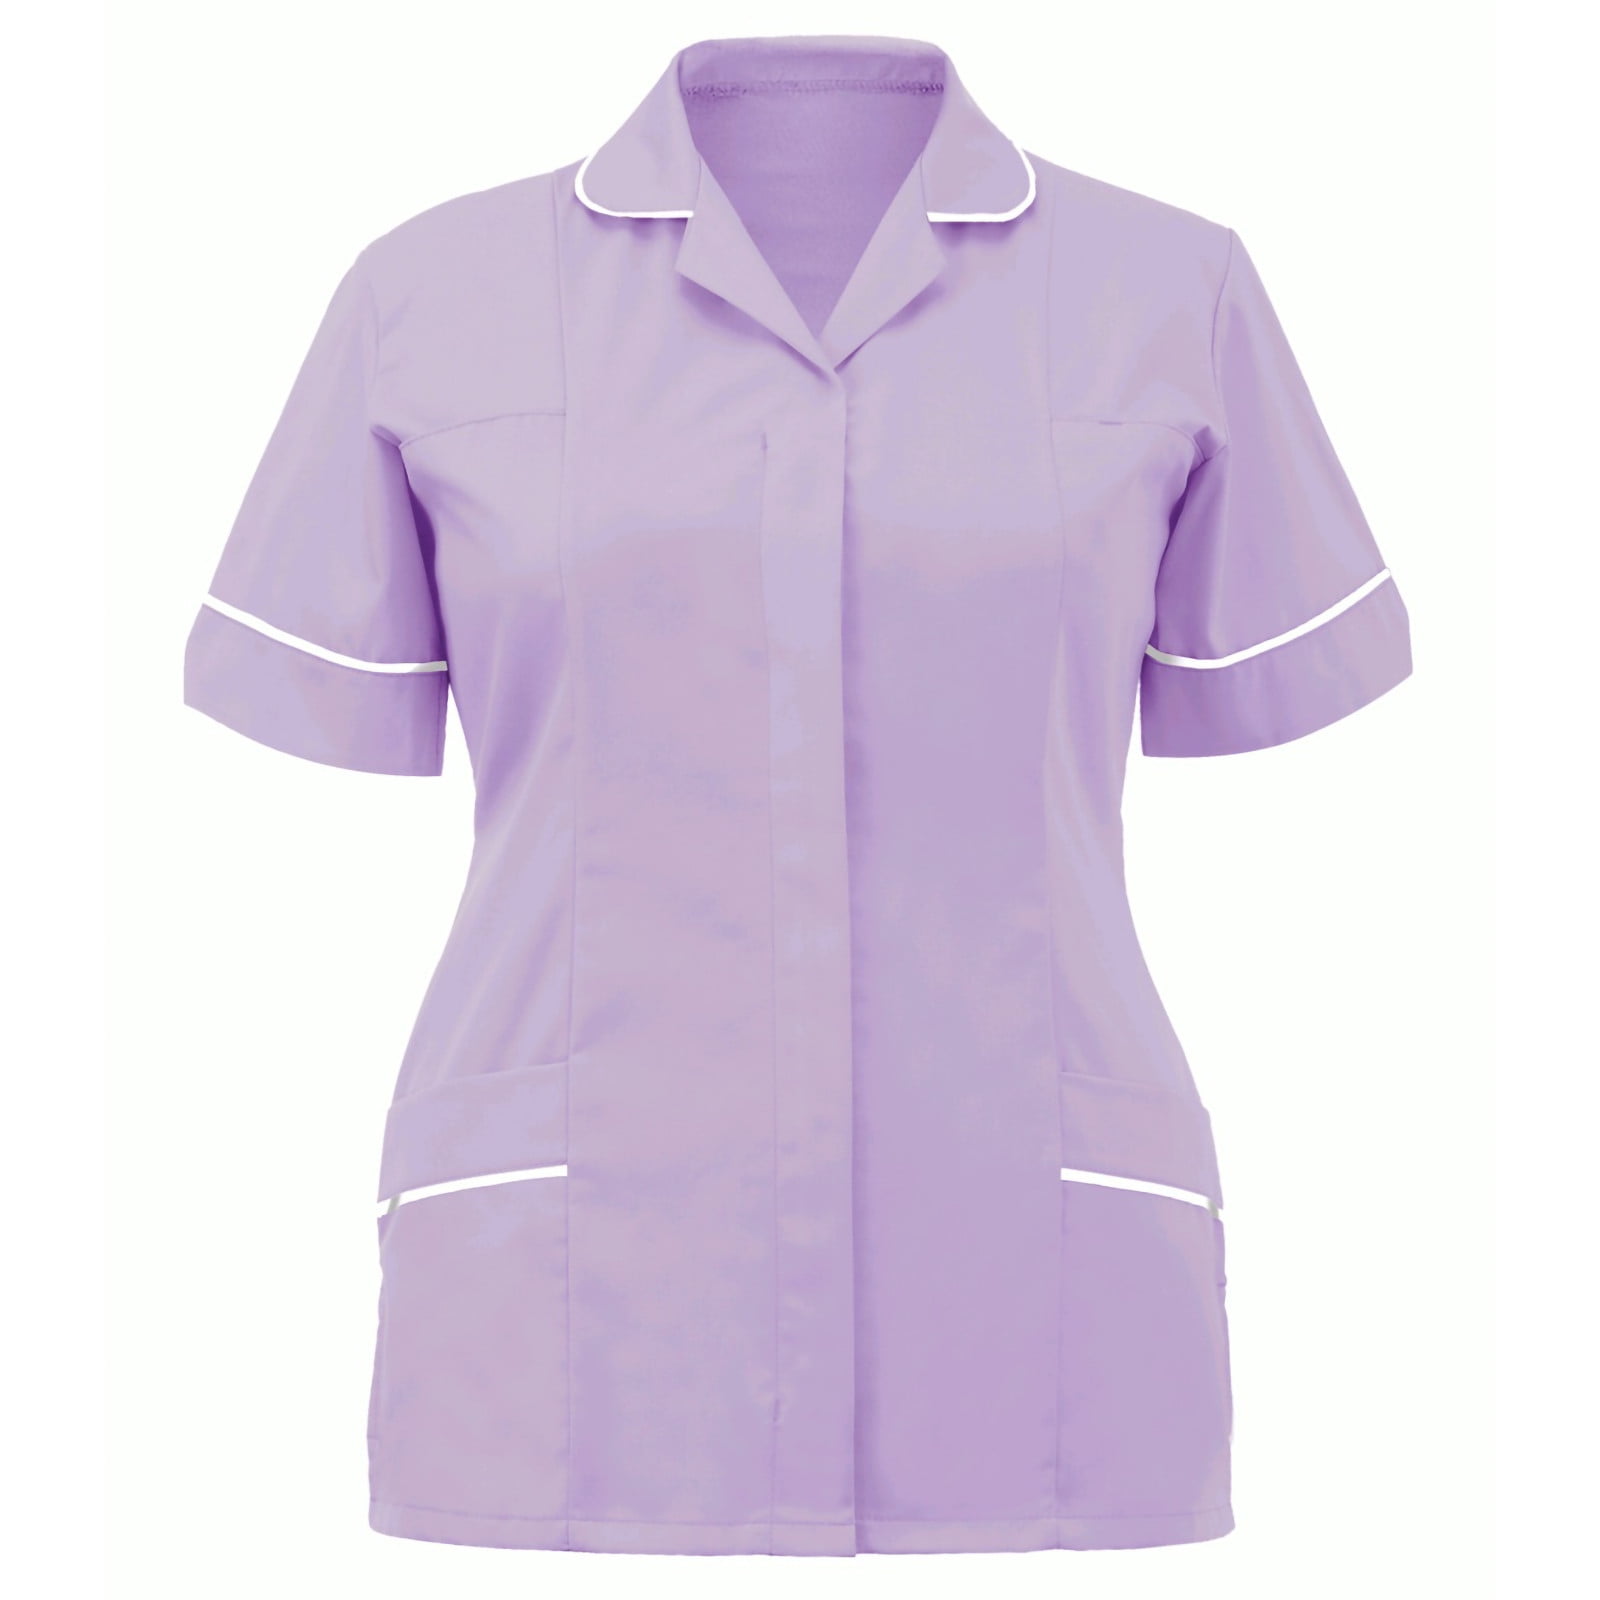 QAZXD Womens Nurses Tunic Clinic Carer Lapel Protective Clothing Tops Pink